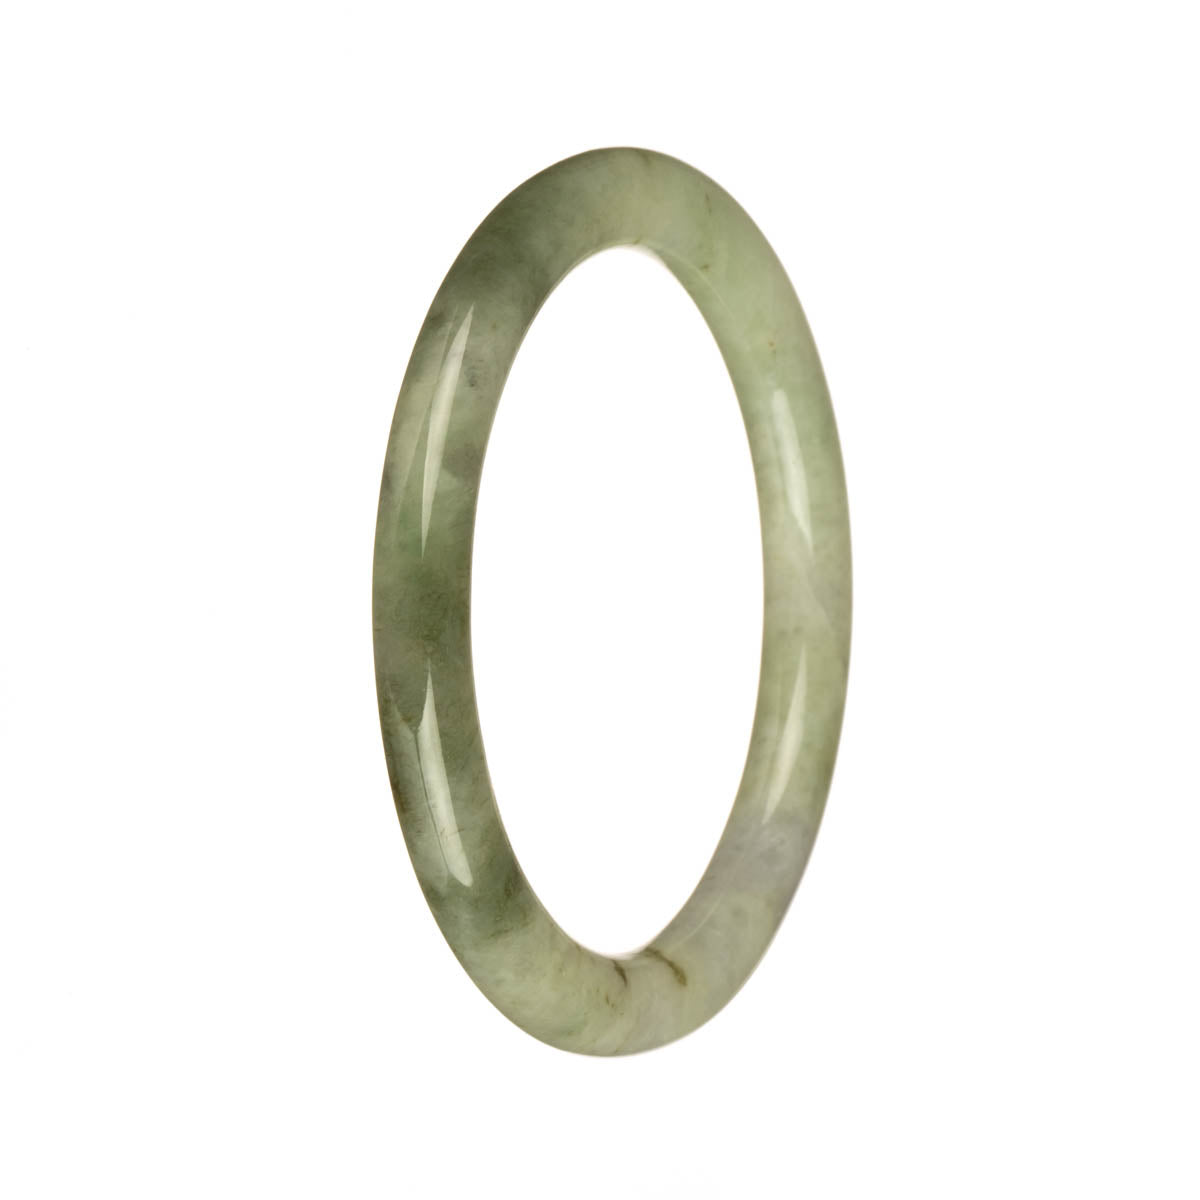 Certified Grade A Light Grey and Pale Green with Olive Green Patterns Burma Jade Bangle - 55mm Petite Round